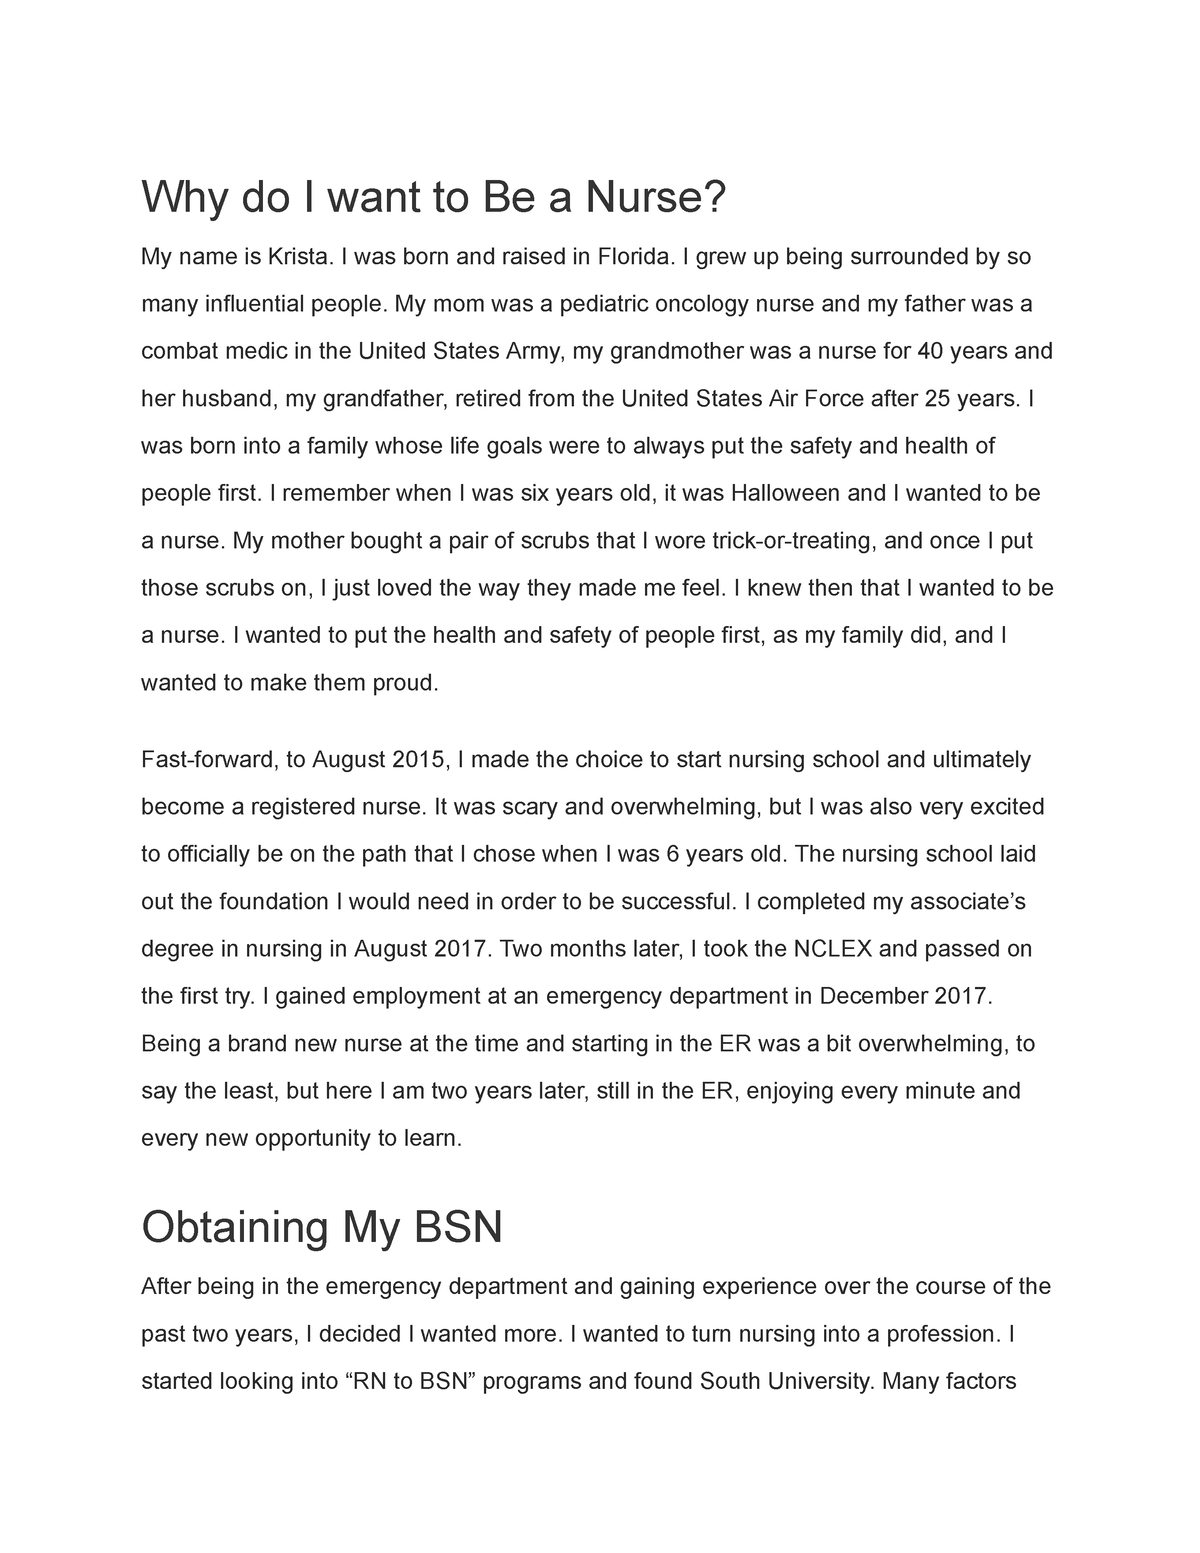 why i want to be a nurse essay 150 words